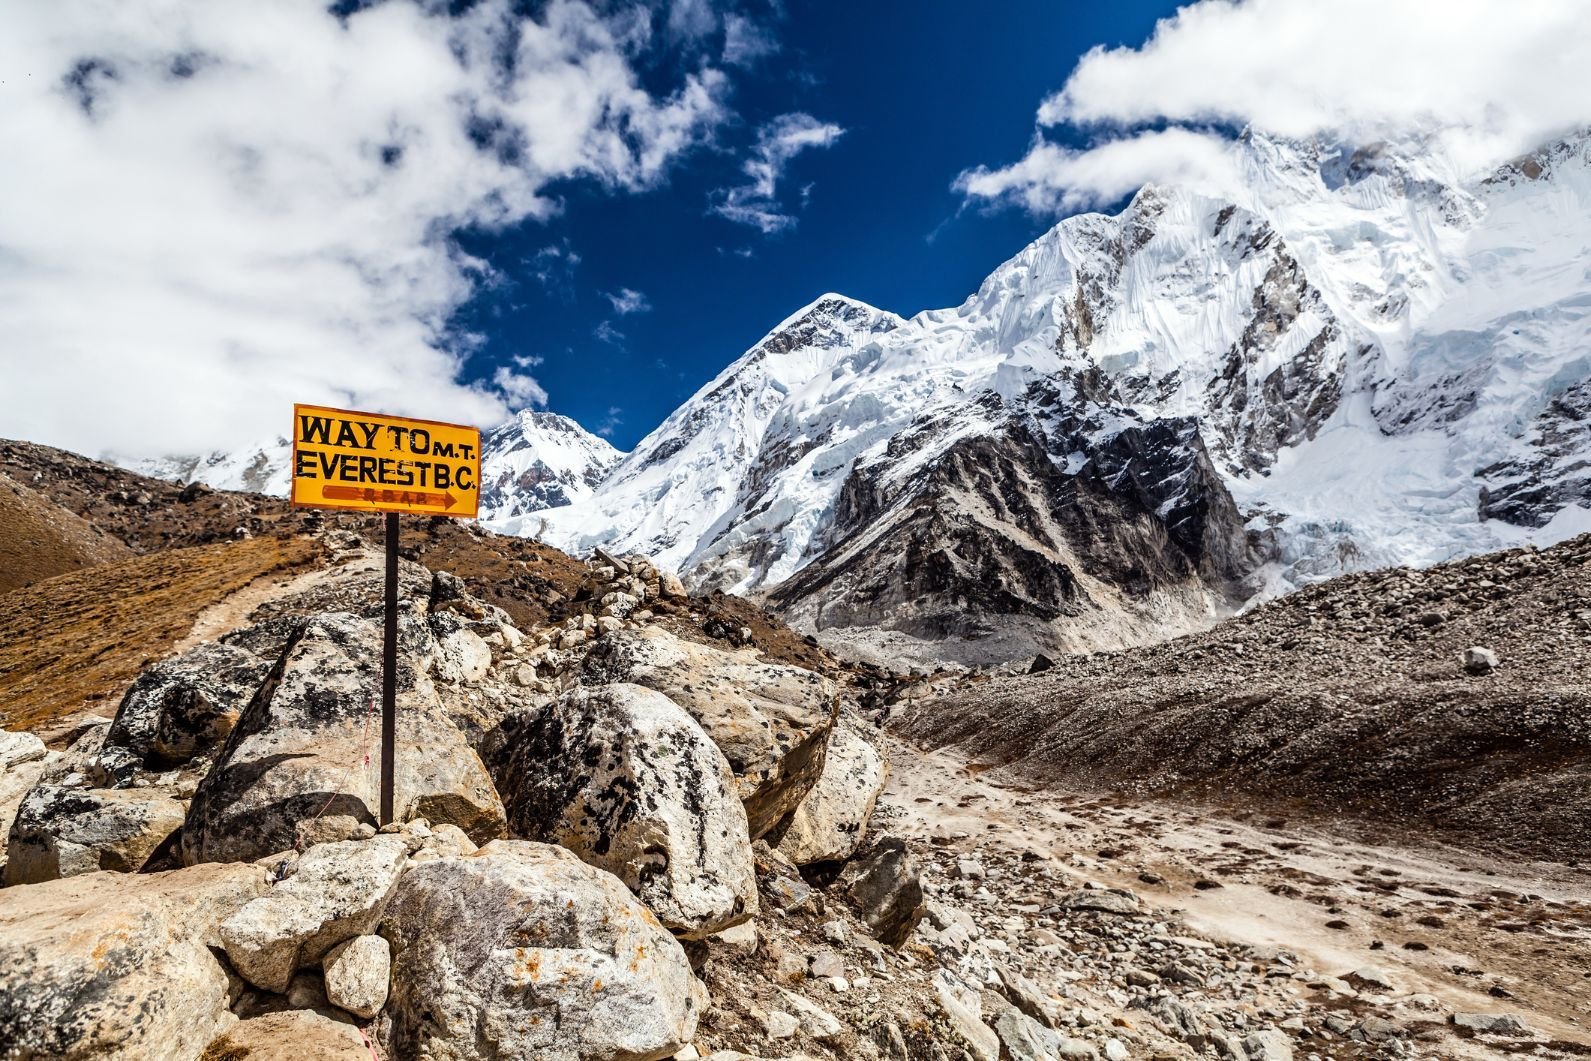 A sign indicating the direction to Everest Base Camp, with a backdrop of the Himalayas.